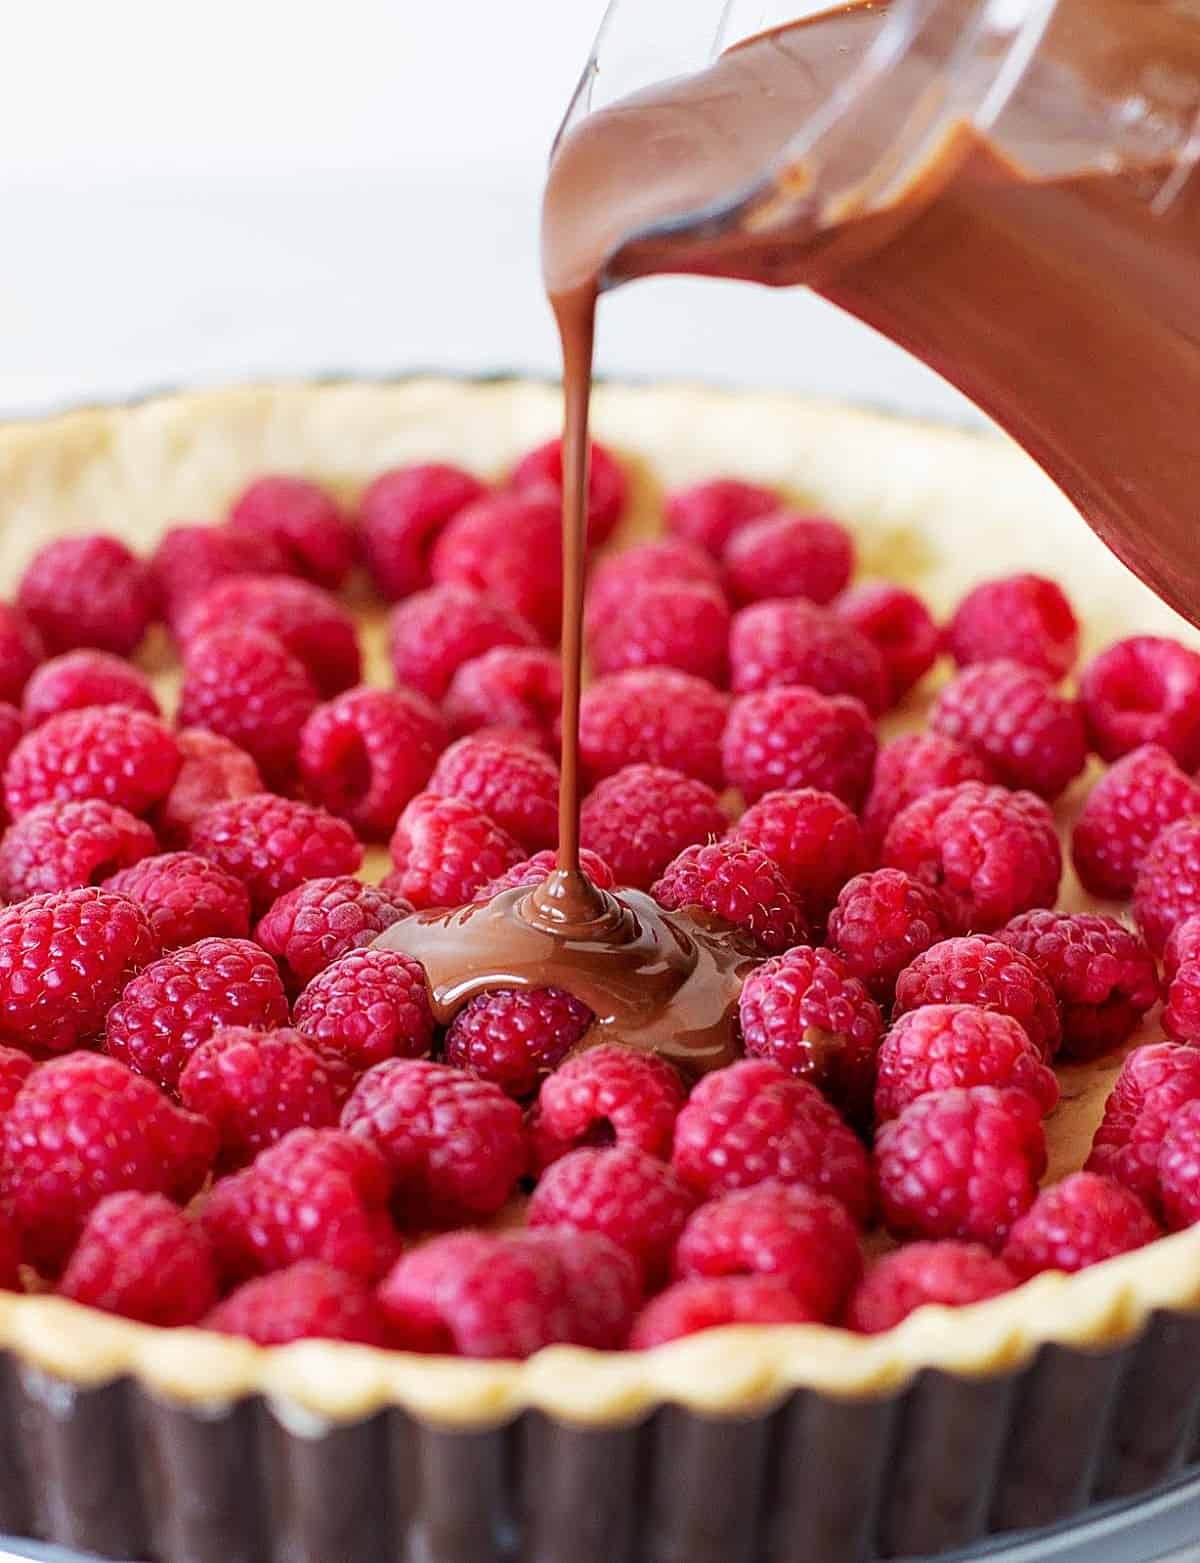 Pouring chocolate filling onto tart crust filled with fresh raspberries